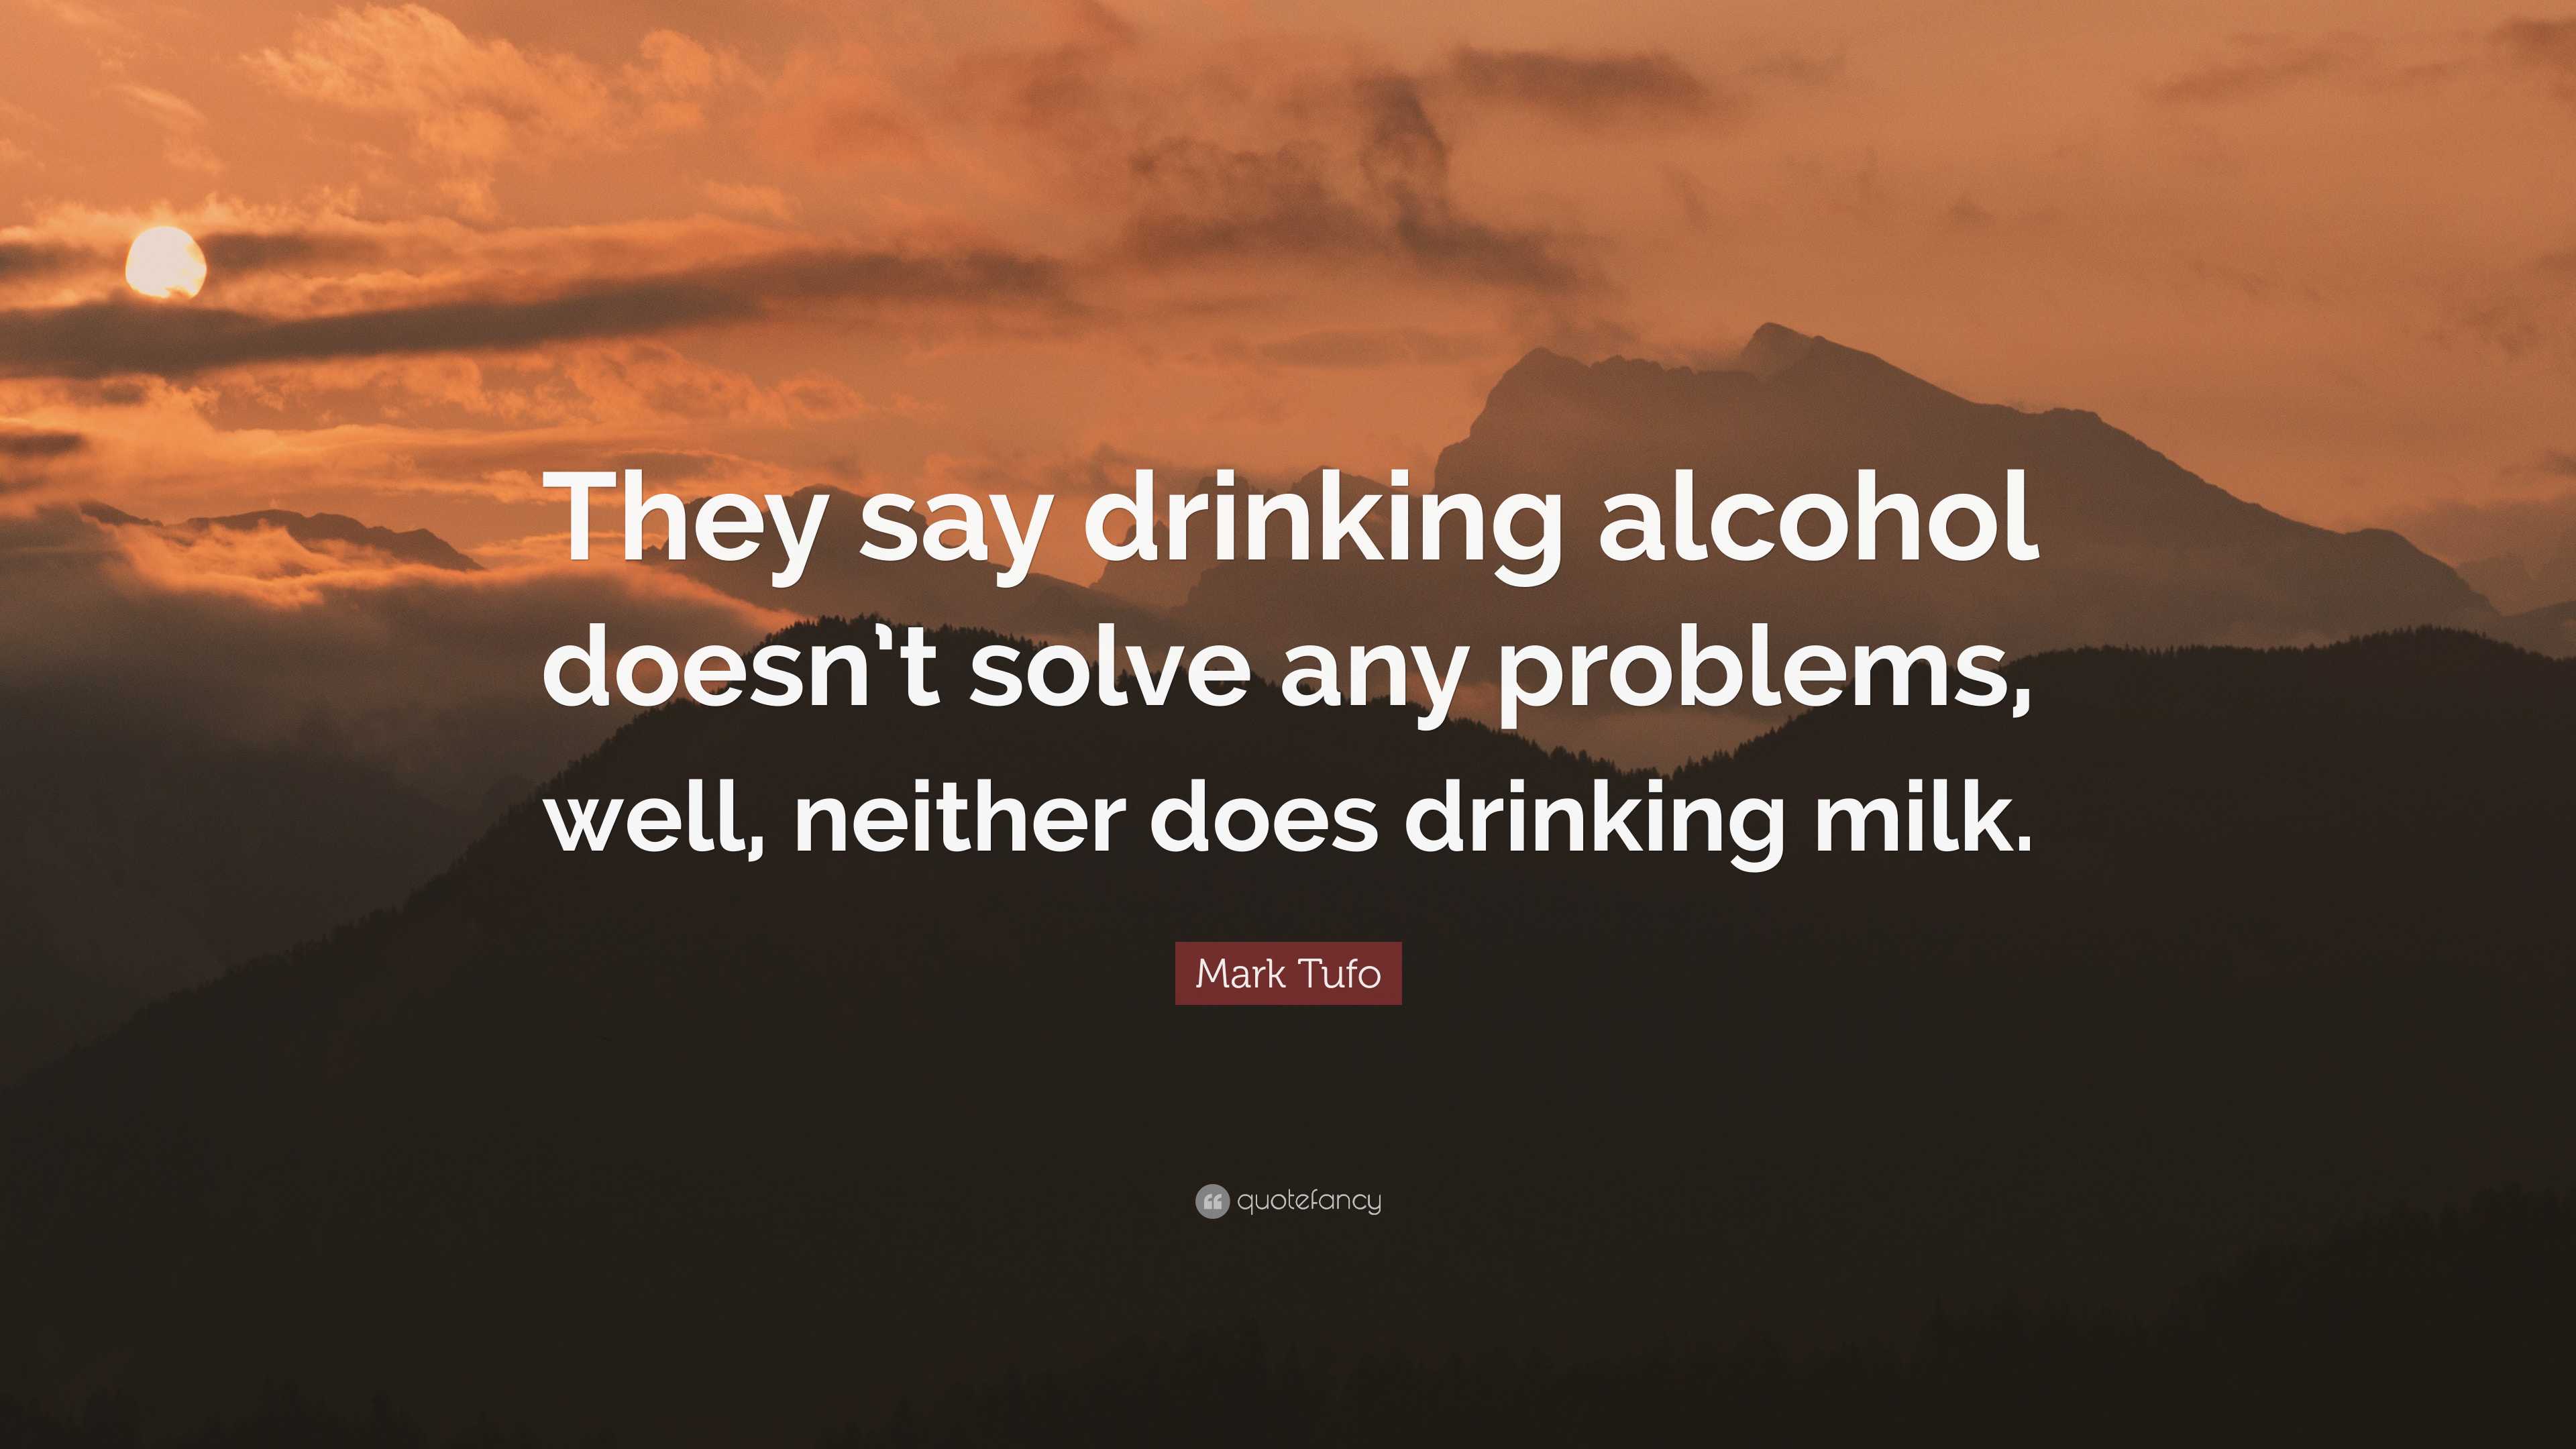 https://quotefancy.com/media/wallpaper/3840x2160/8010471-Mark-Tufo-Quote-They-say-drinking-alcohol-doesn-t-solve-any.jpg